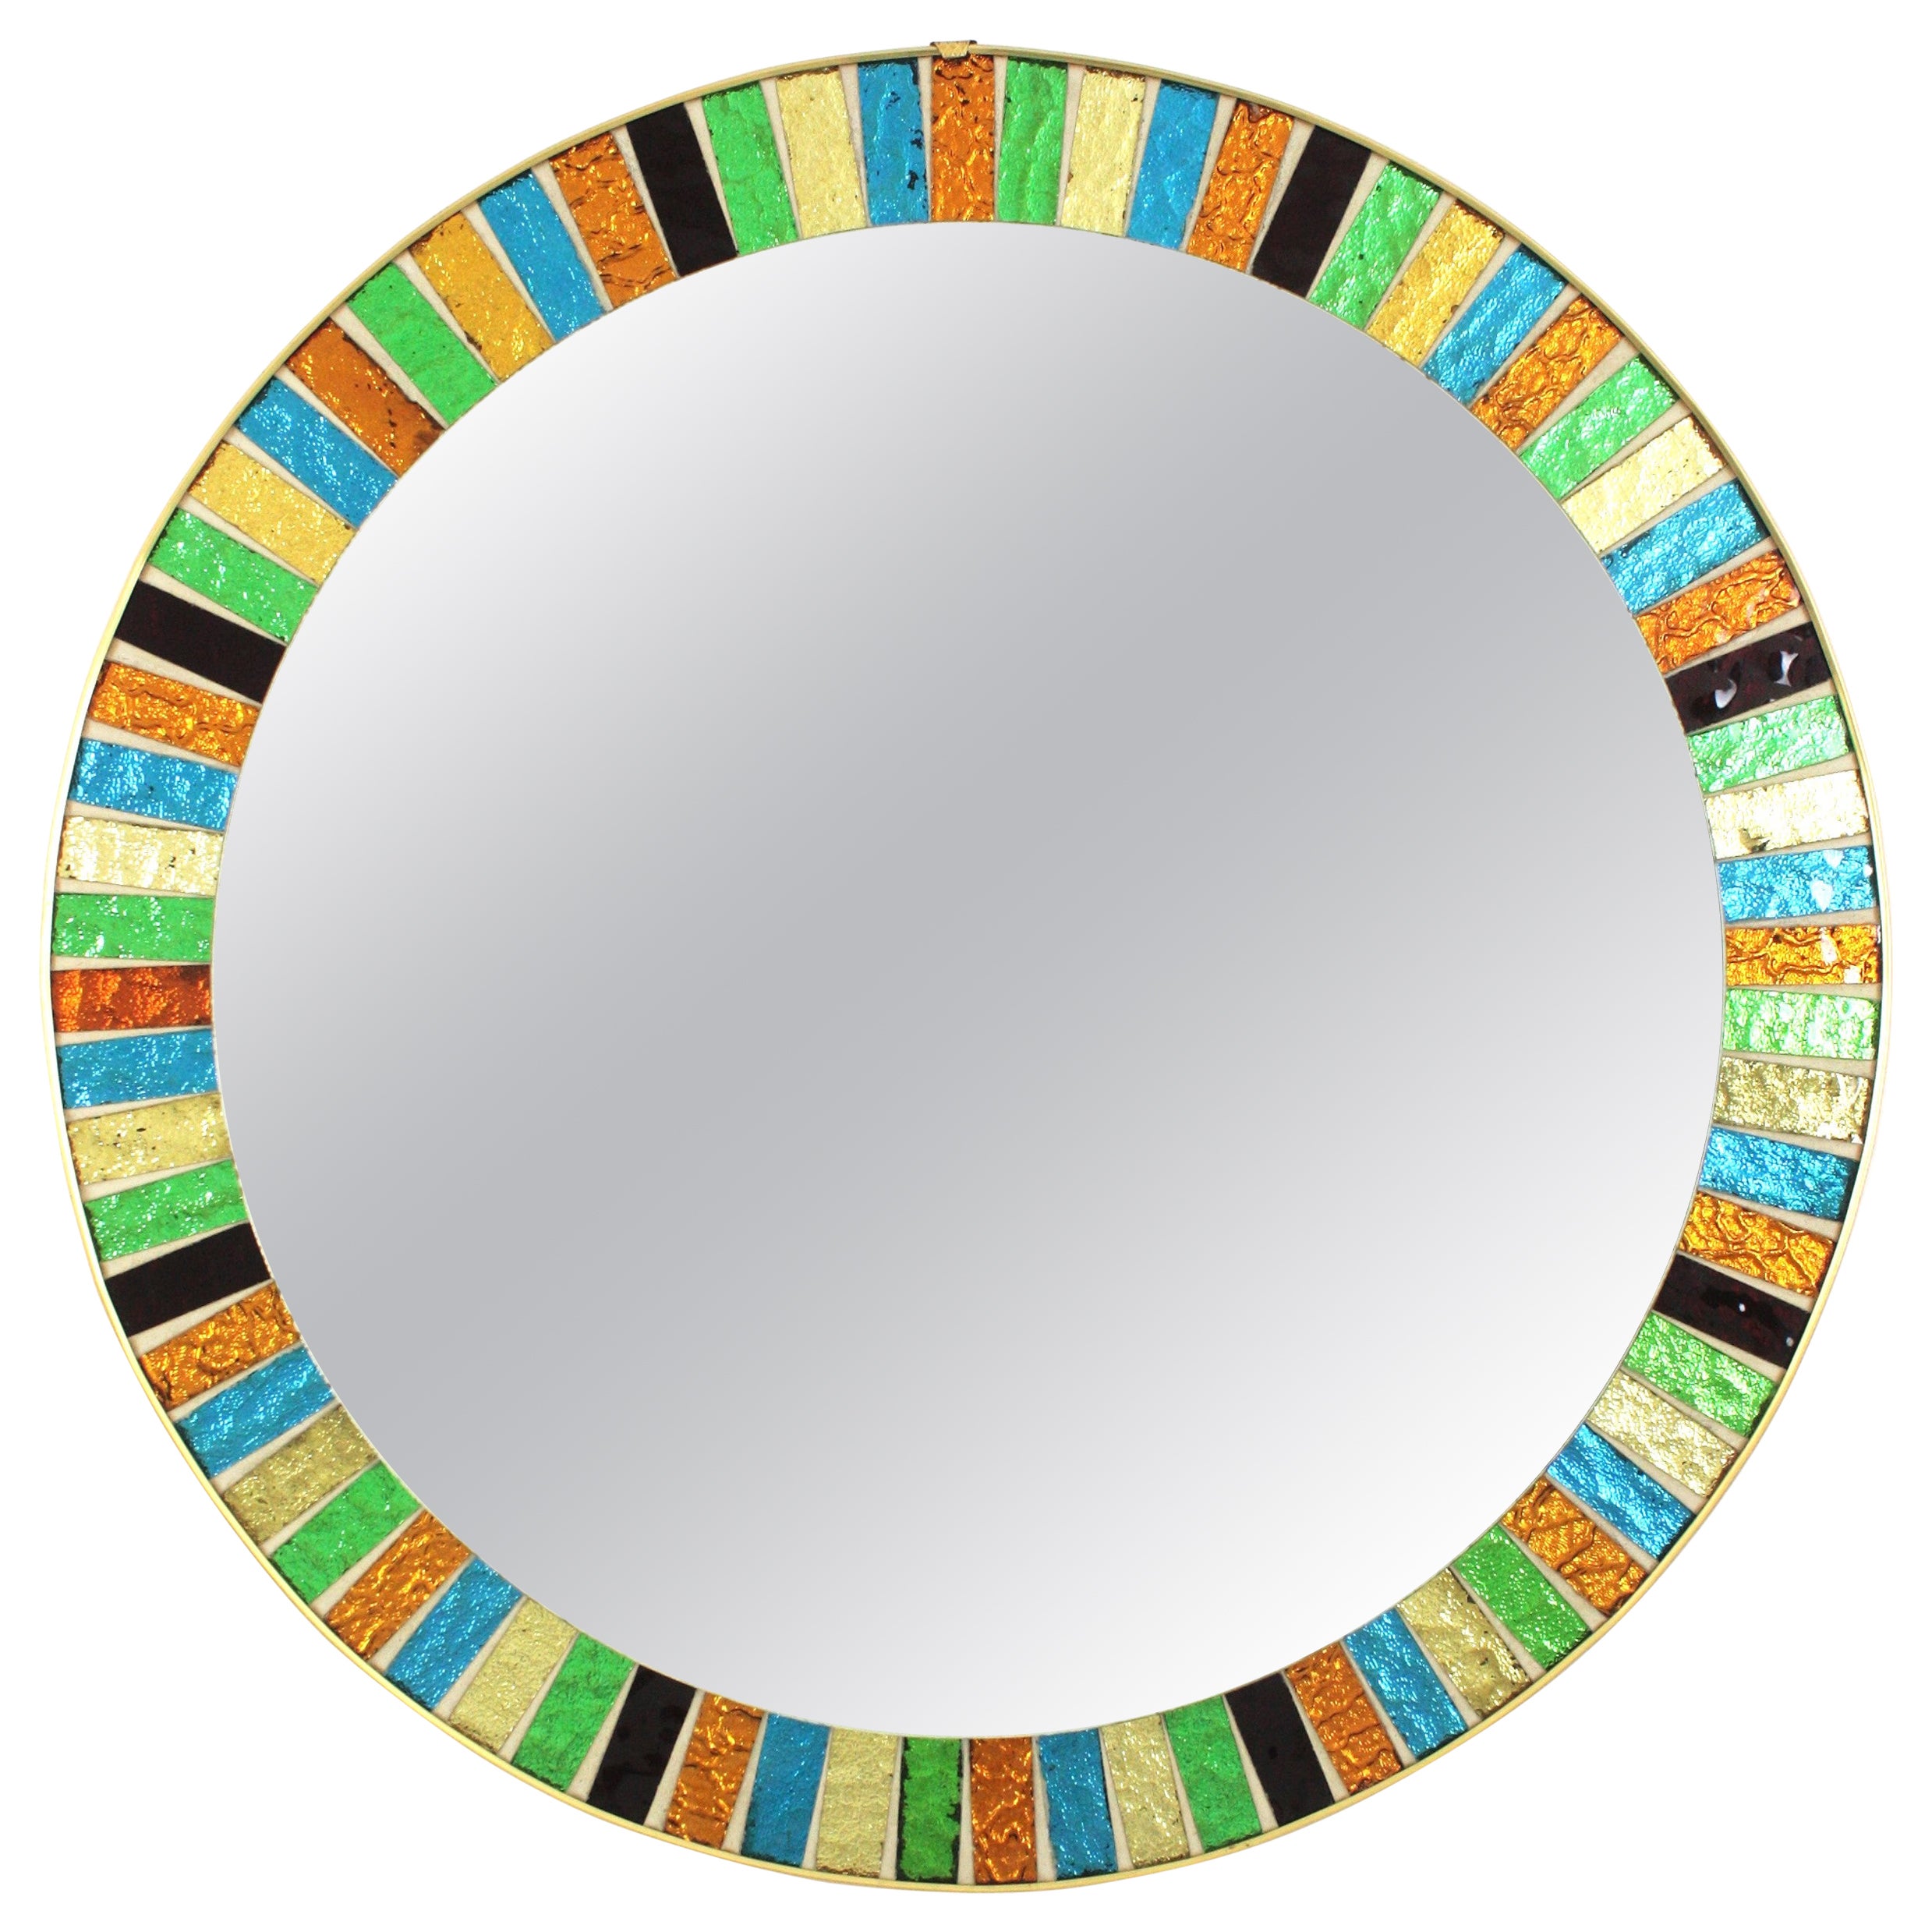 MDM Round Sunburst Mirror with Multicolor Glass Mosaic Frame For Sale